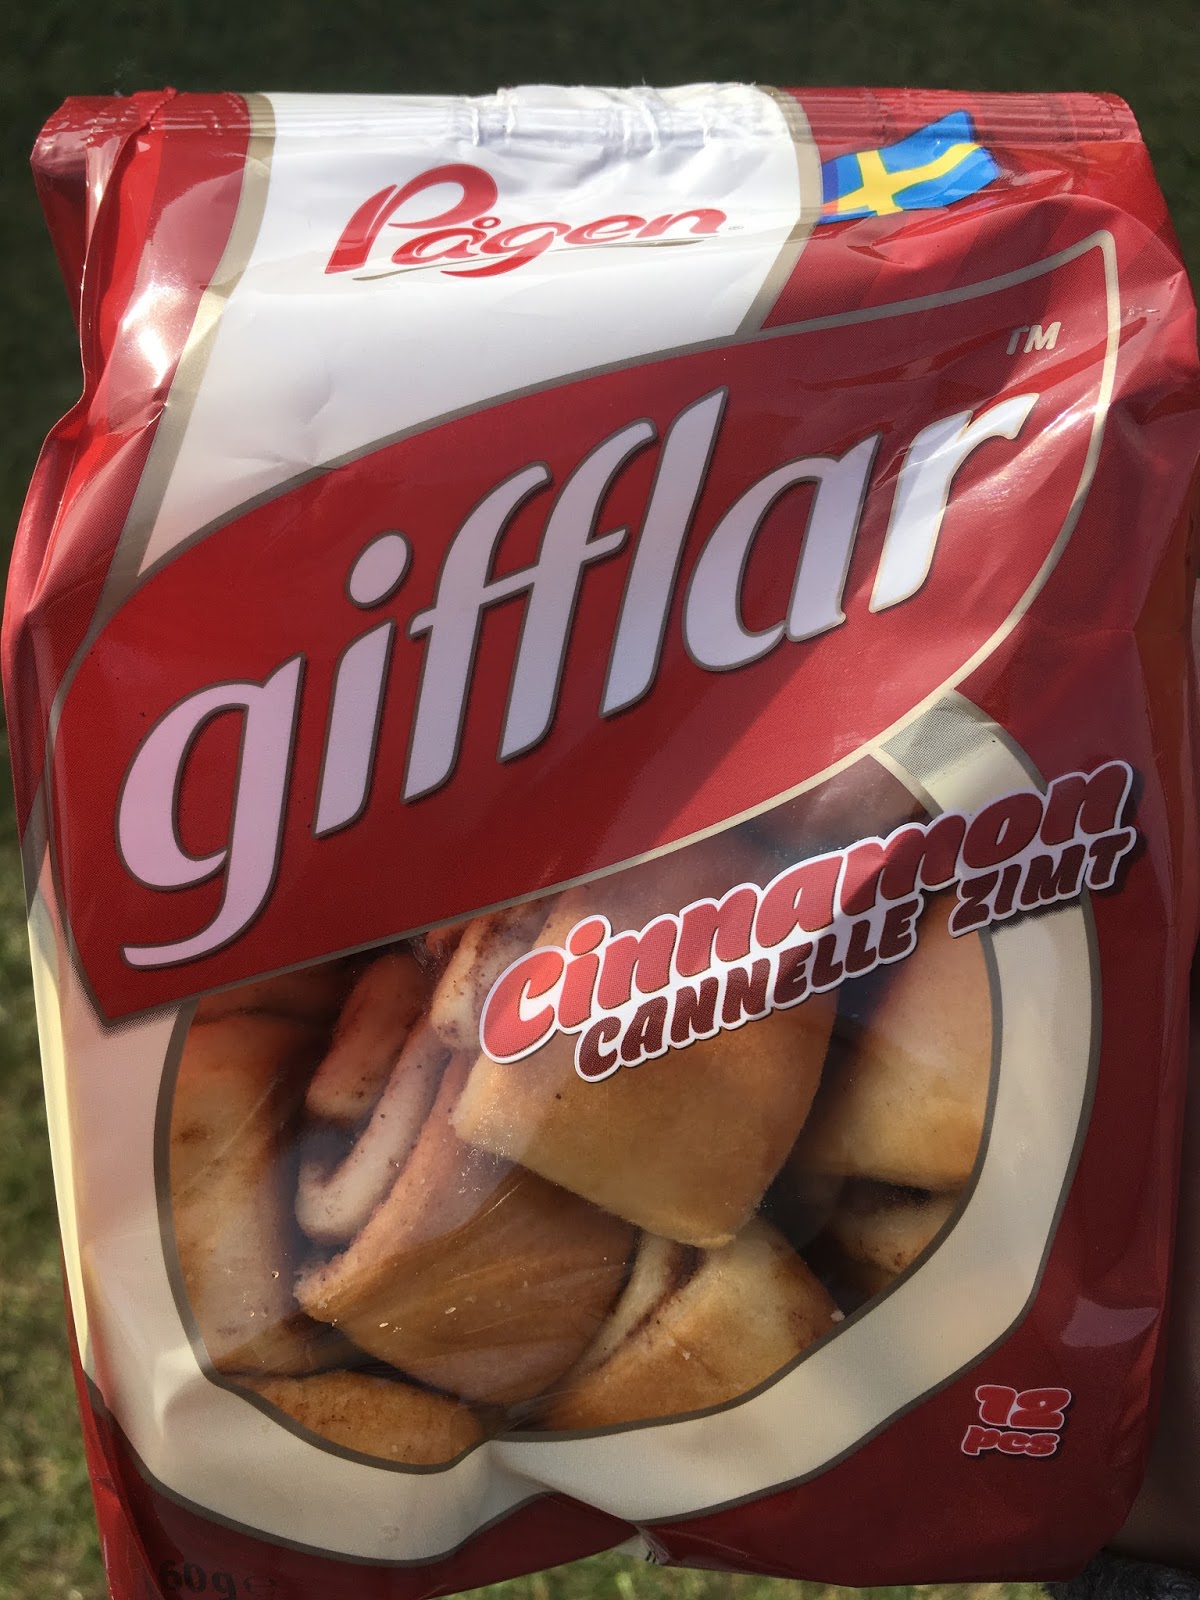 A Review A Day: Today's Review: Gifflar Cinnamon Rolls